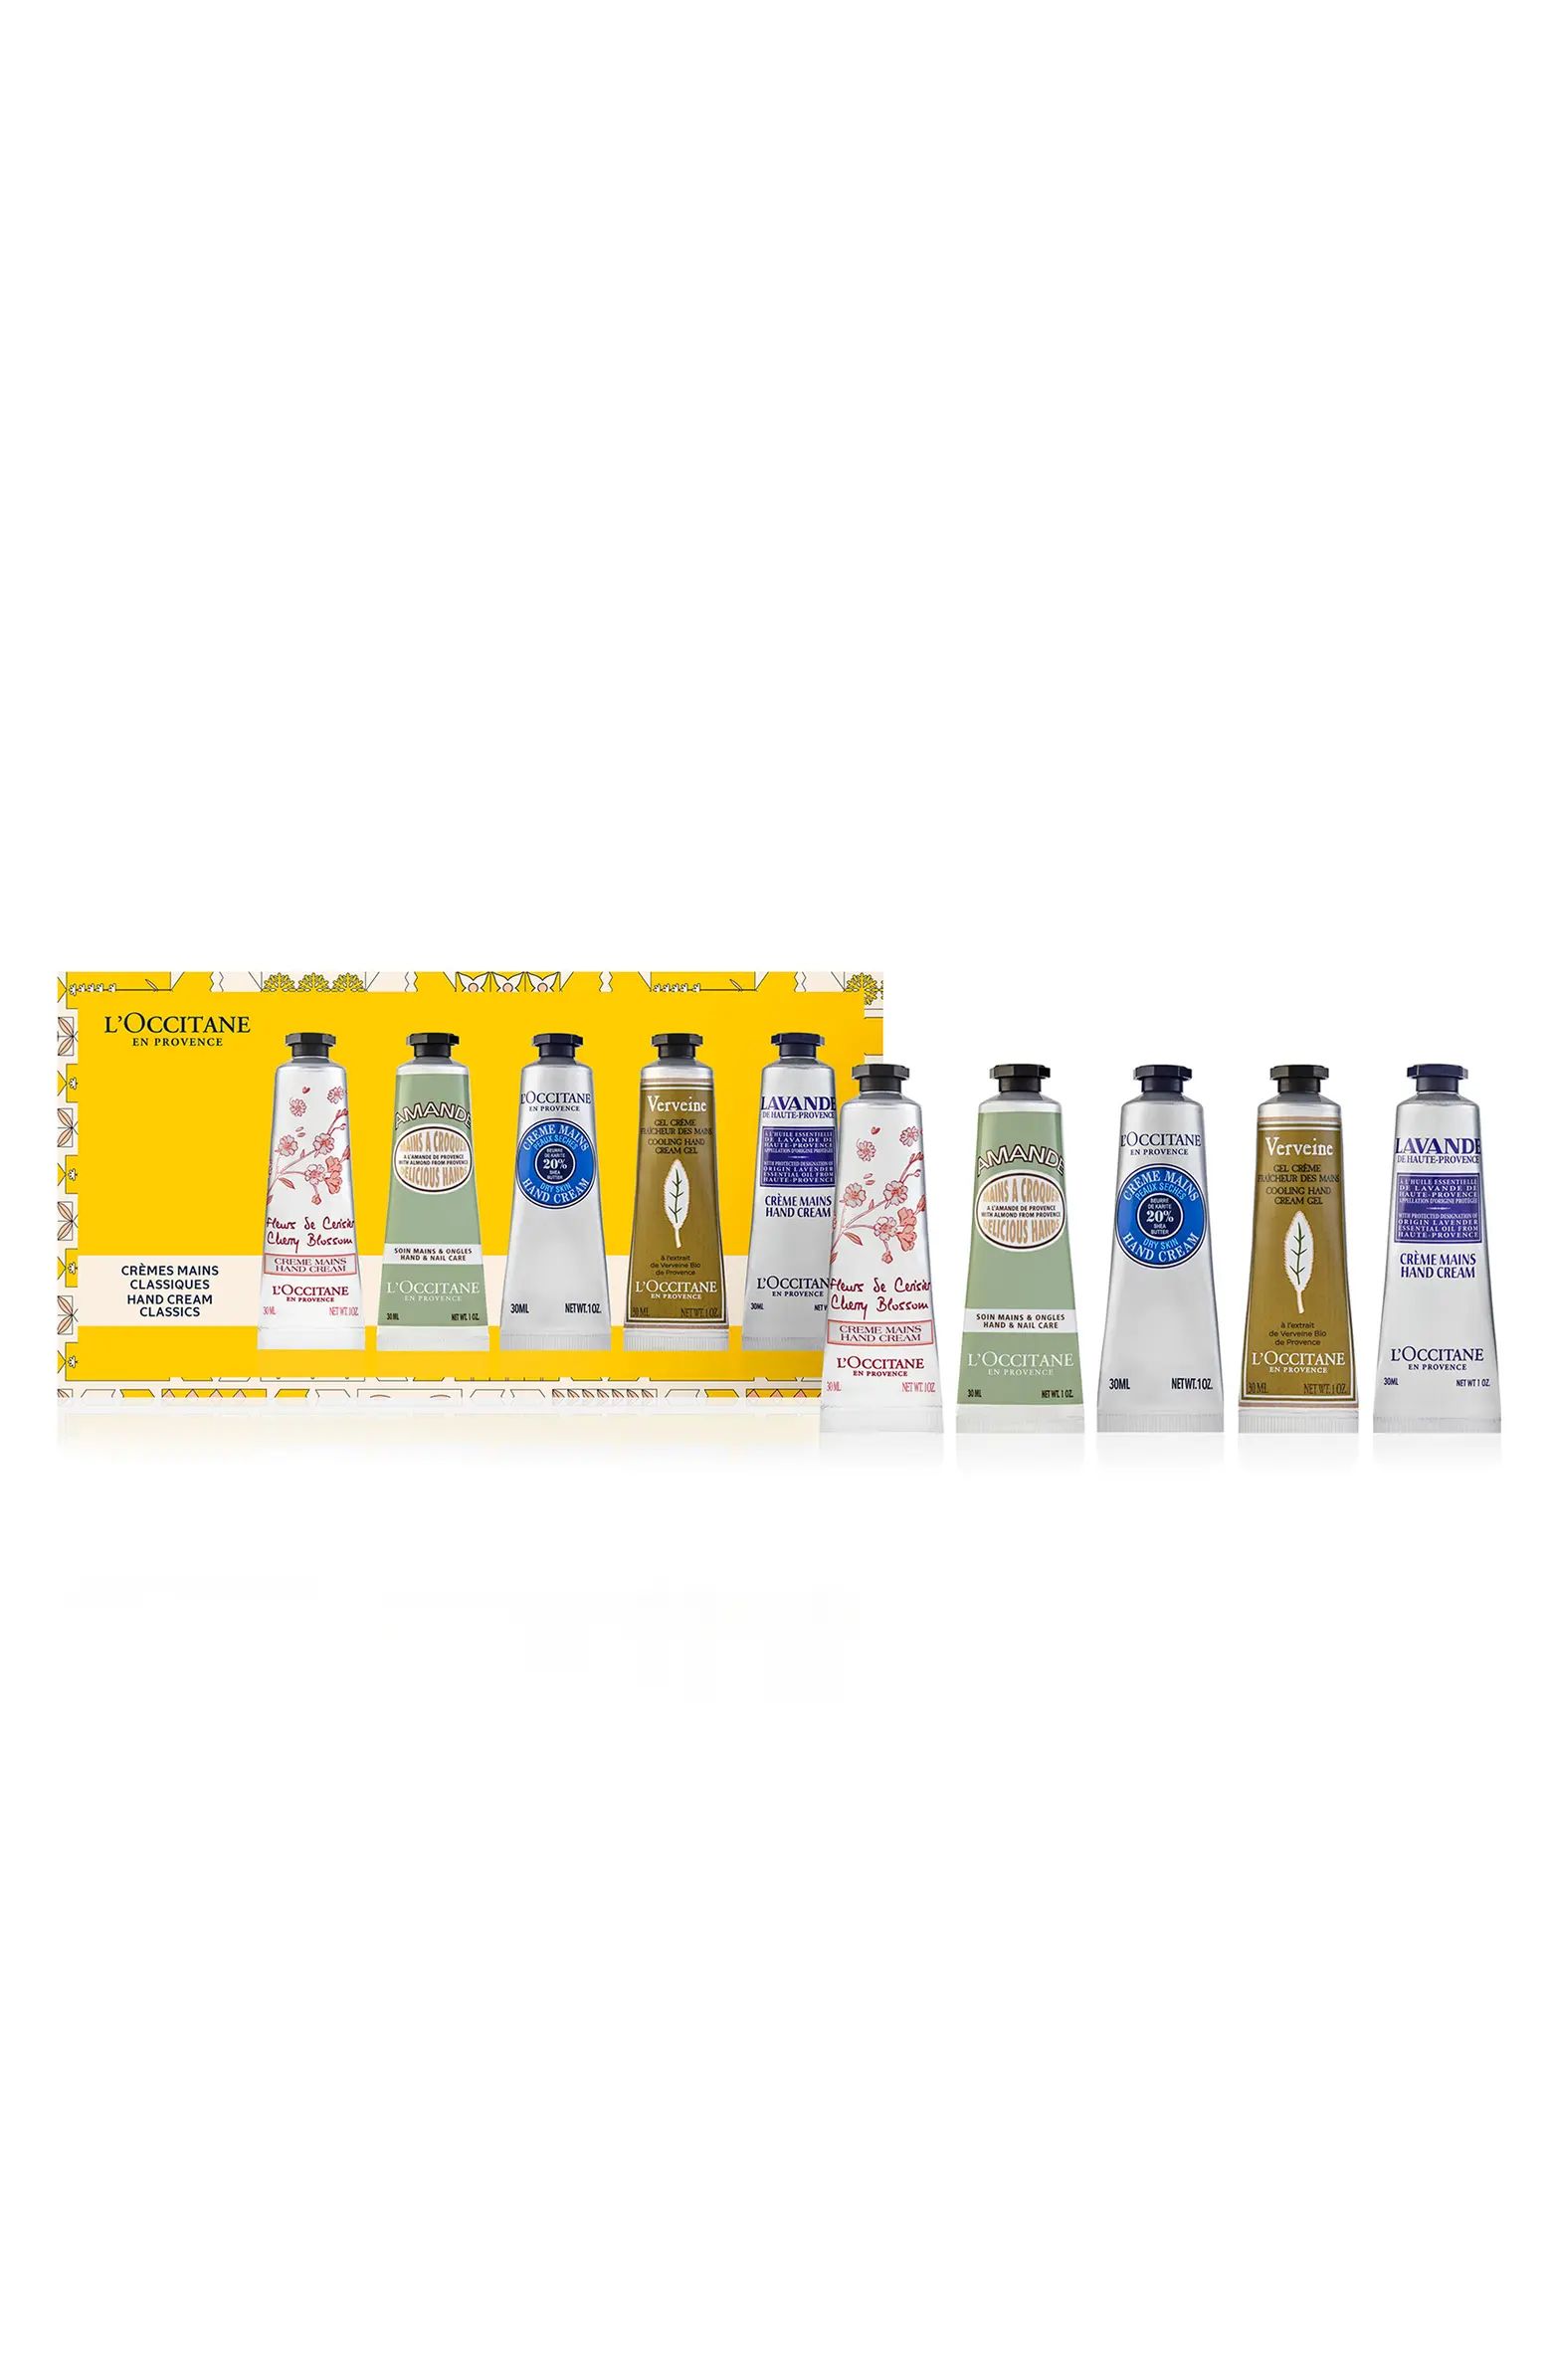 Holiday Classics Set of 5 Hand Creams $65 Value | Nordstrom